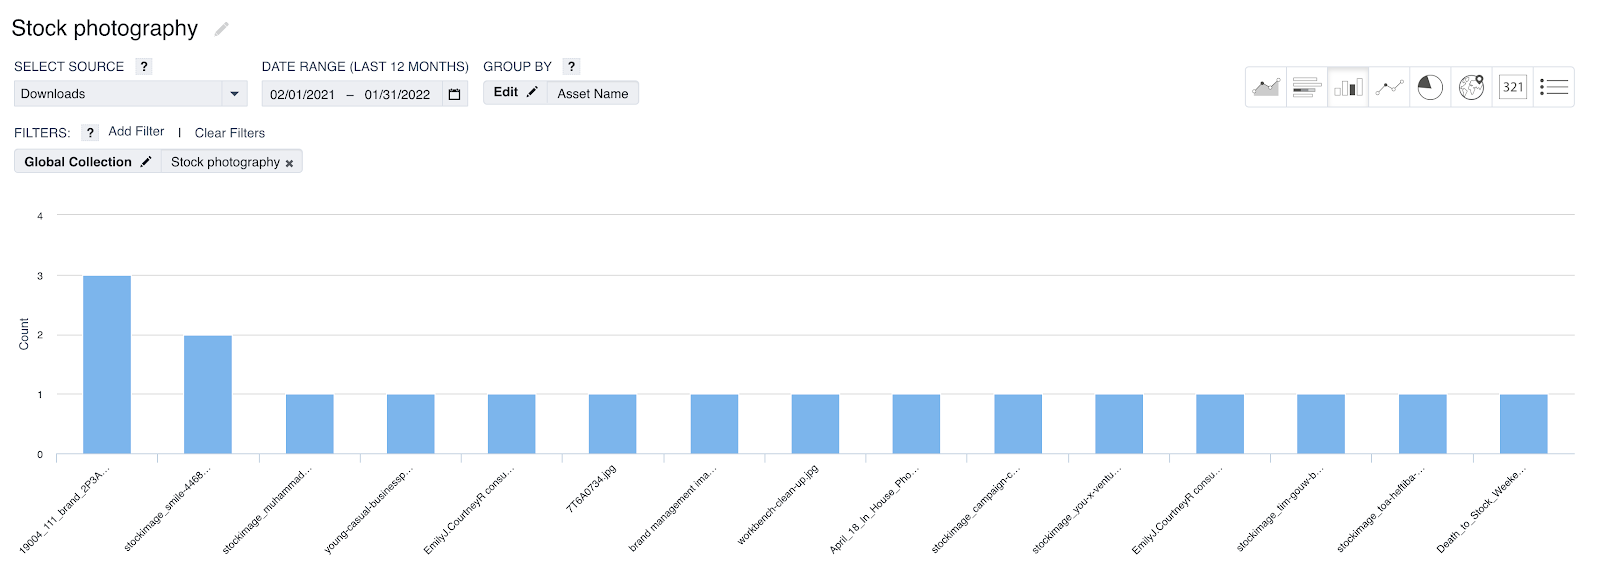 Stock photography Insights chart to see downloads by global collection. 